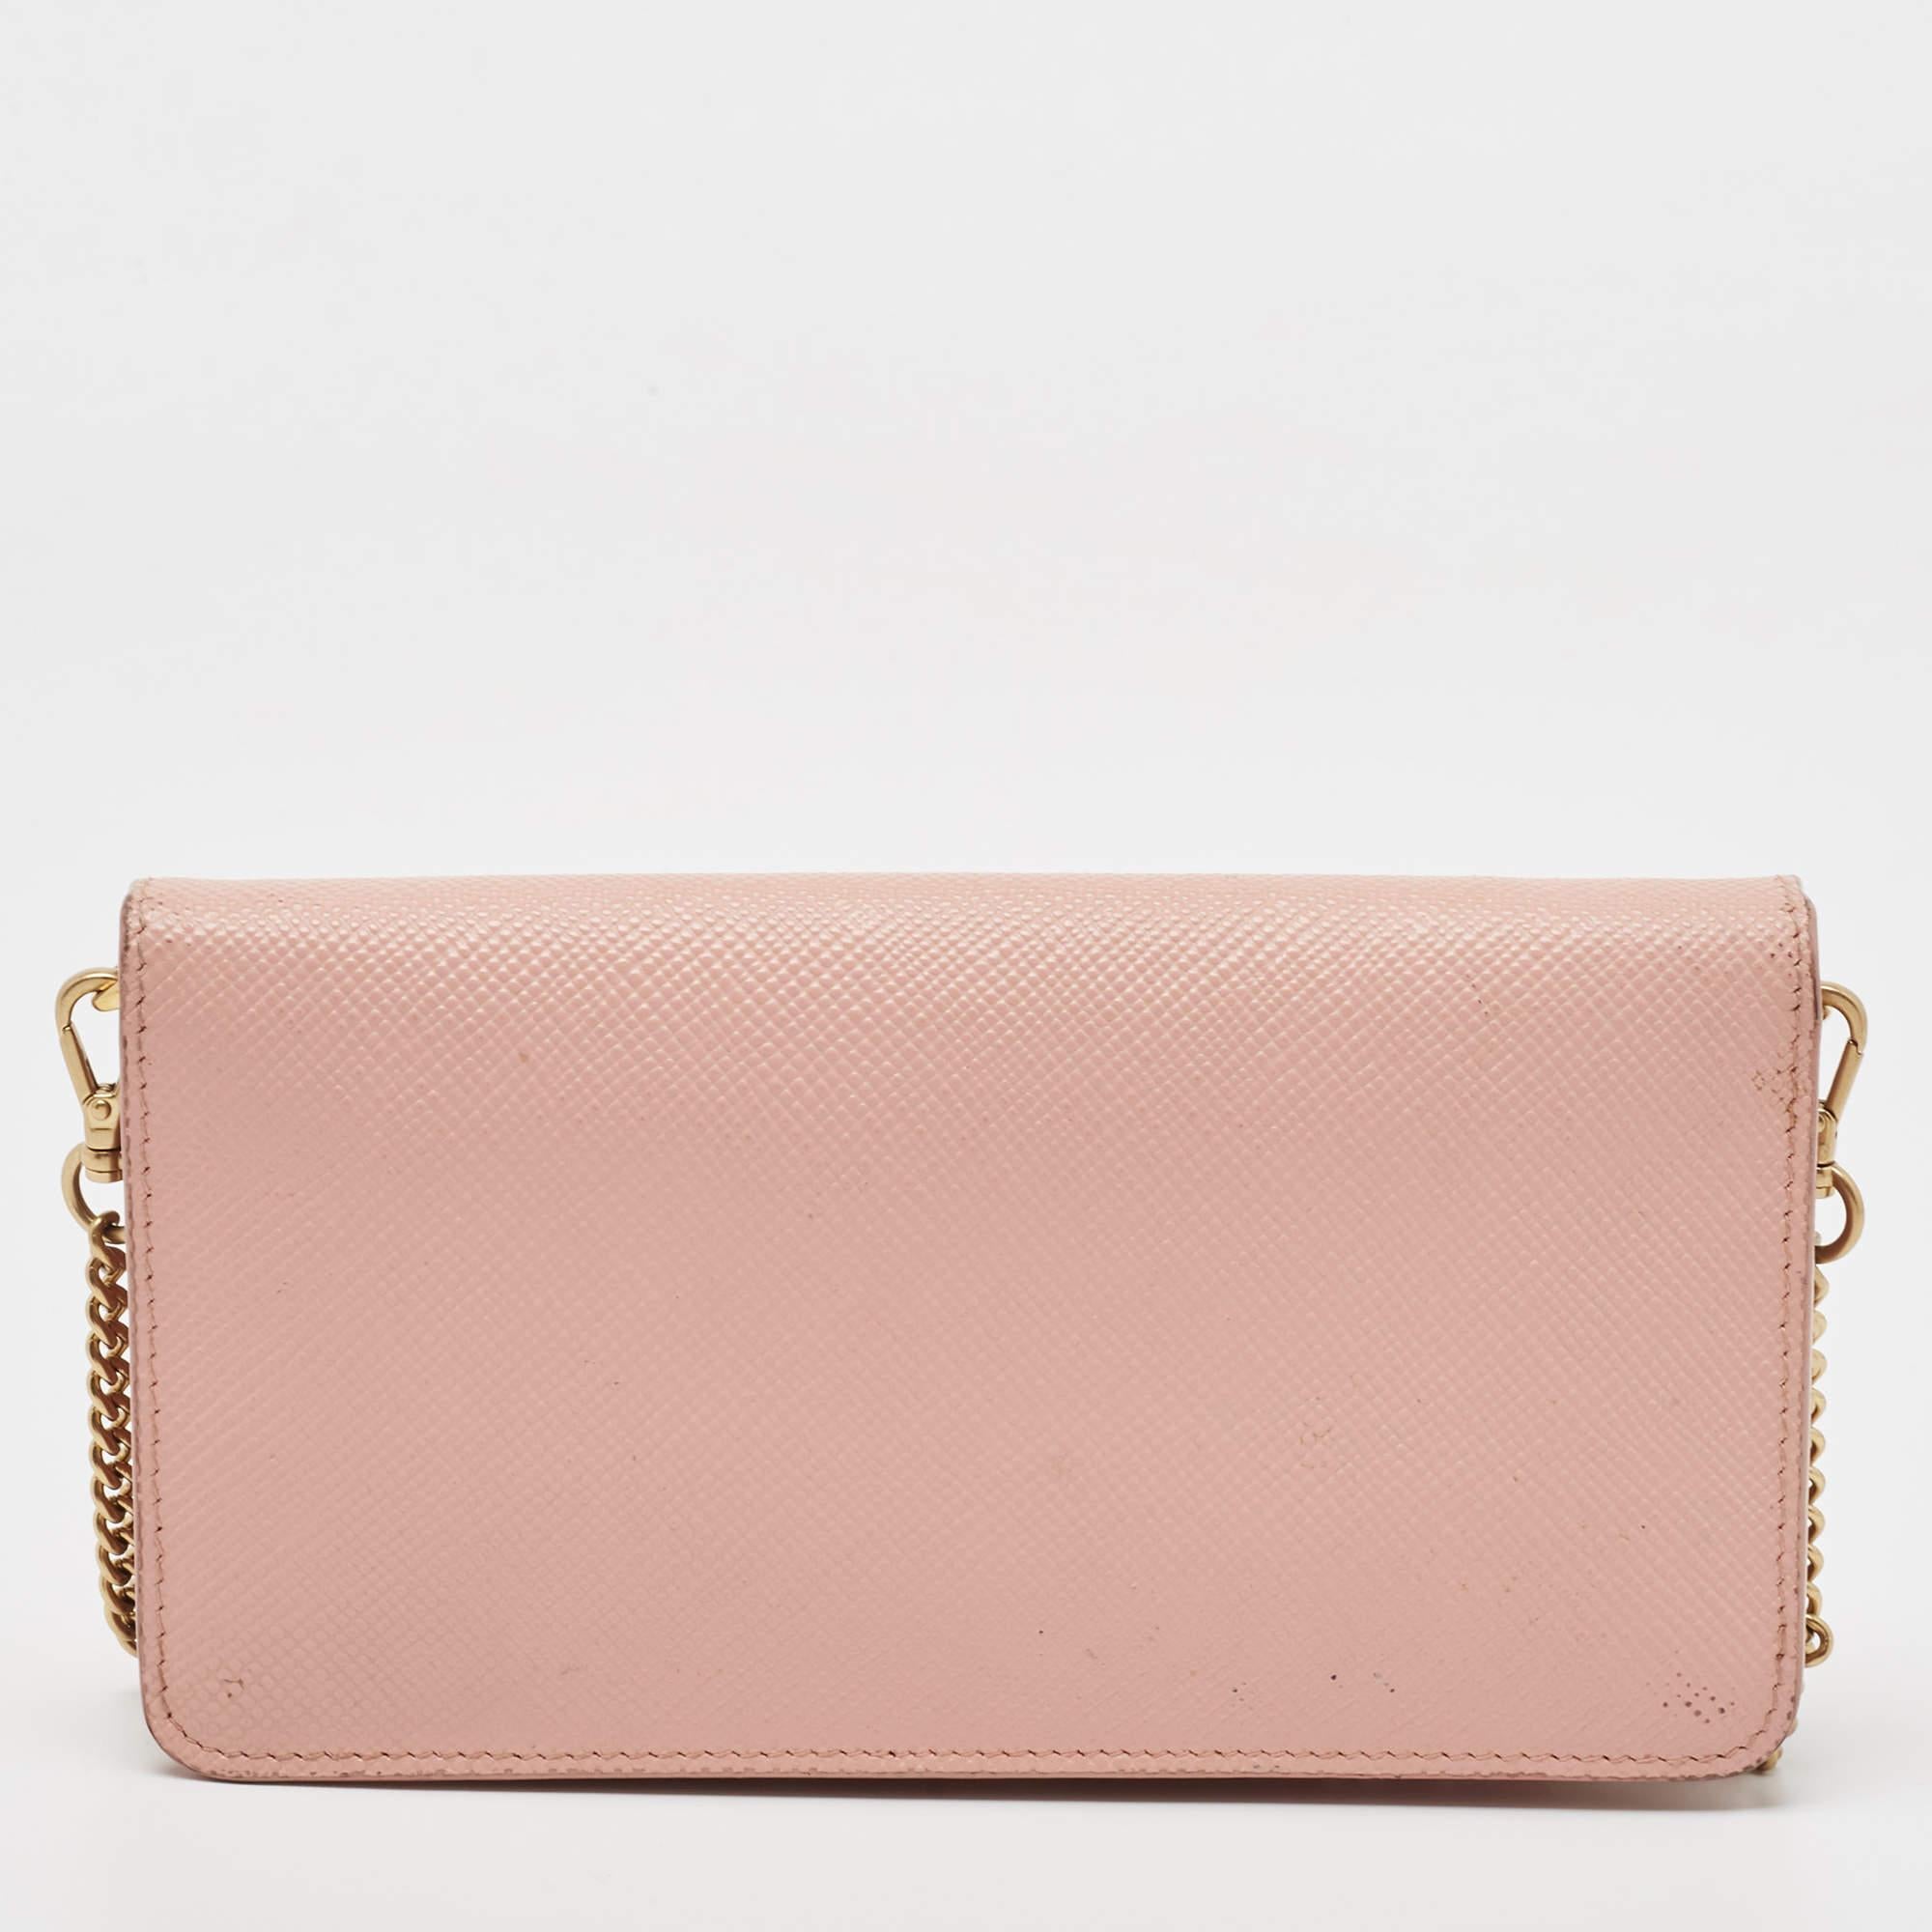 Crafted in Italy, this Prada WOC is made from Saffiano Cuir leather and comes in pink. It has a front flap with the signature detail and it opens to a lined interior. The bag is equipped with a shoulder chain in gold-tone.

Includes: Authenticity